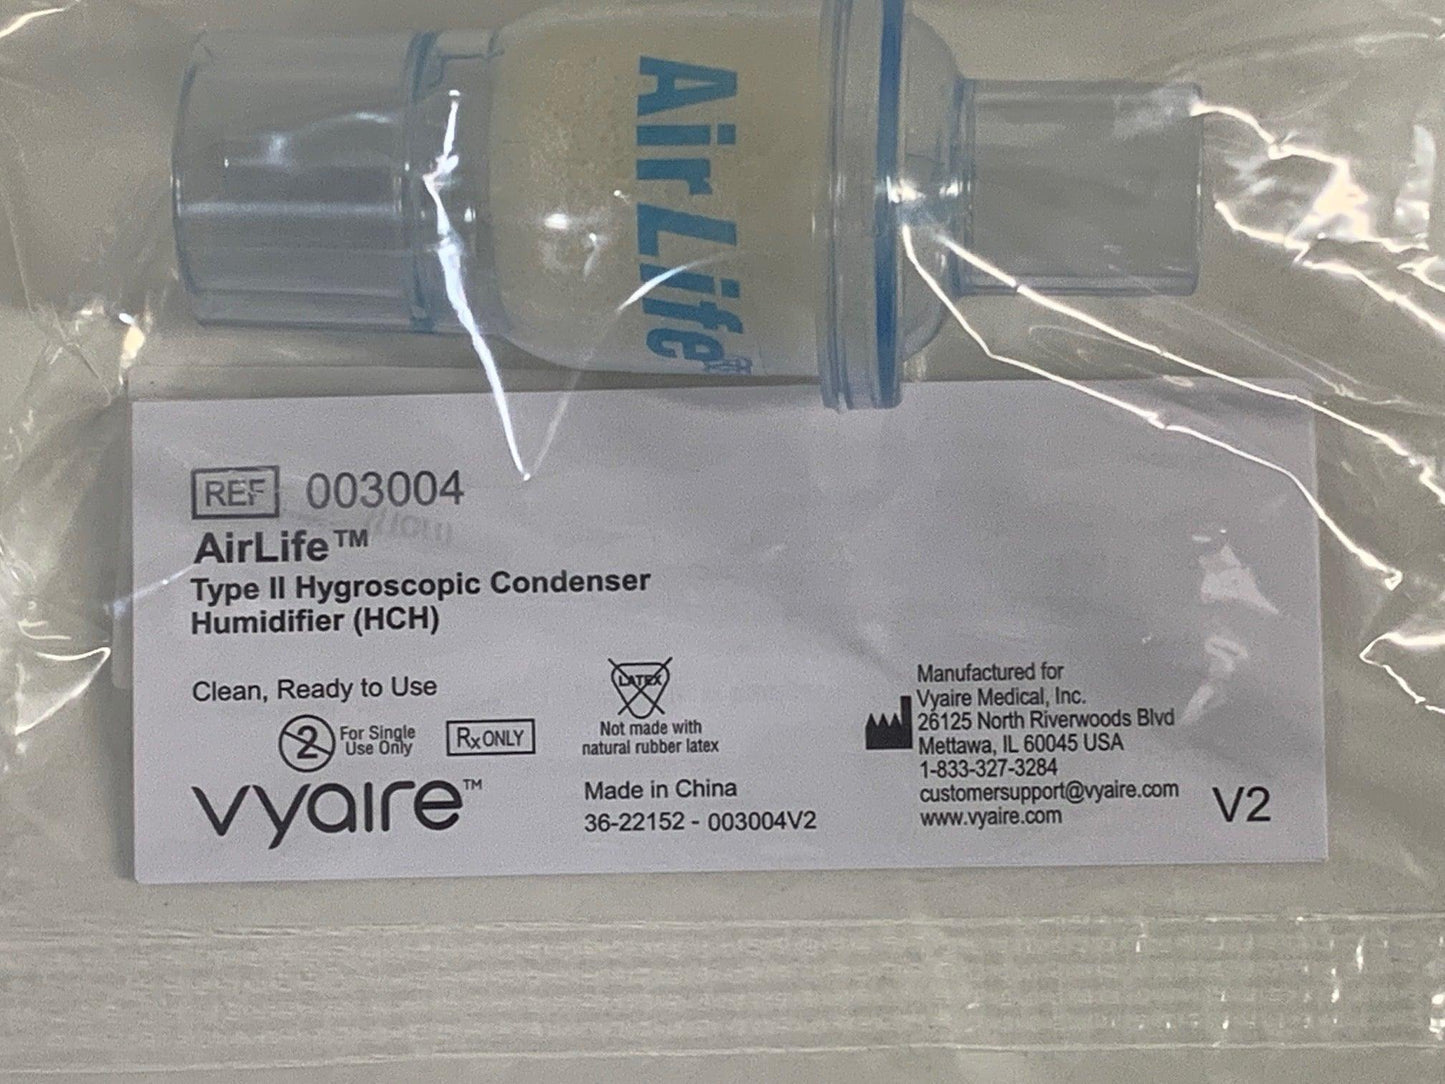 NEW Lot of 10 Vyaire Airlife Type II Hygroscopic Condenser Humidifier 003004